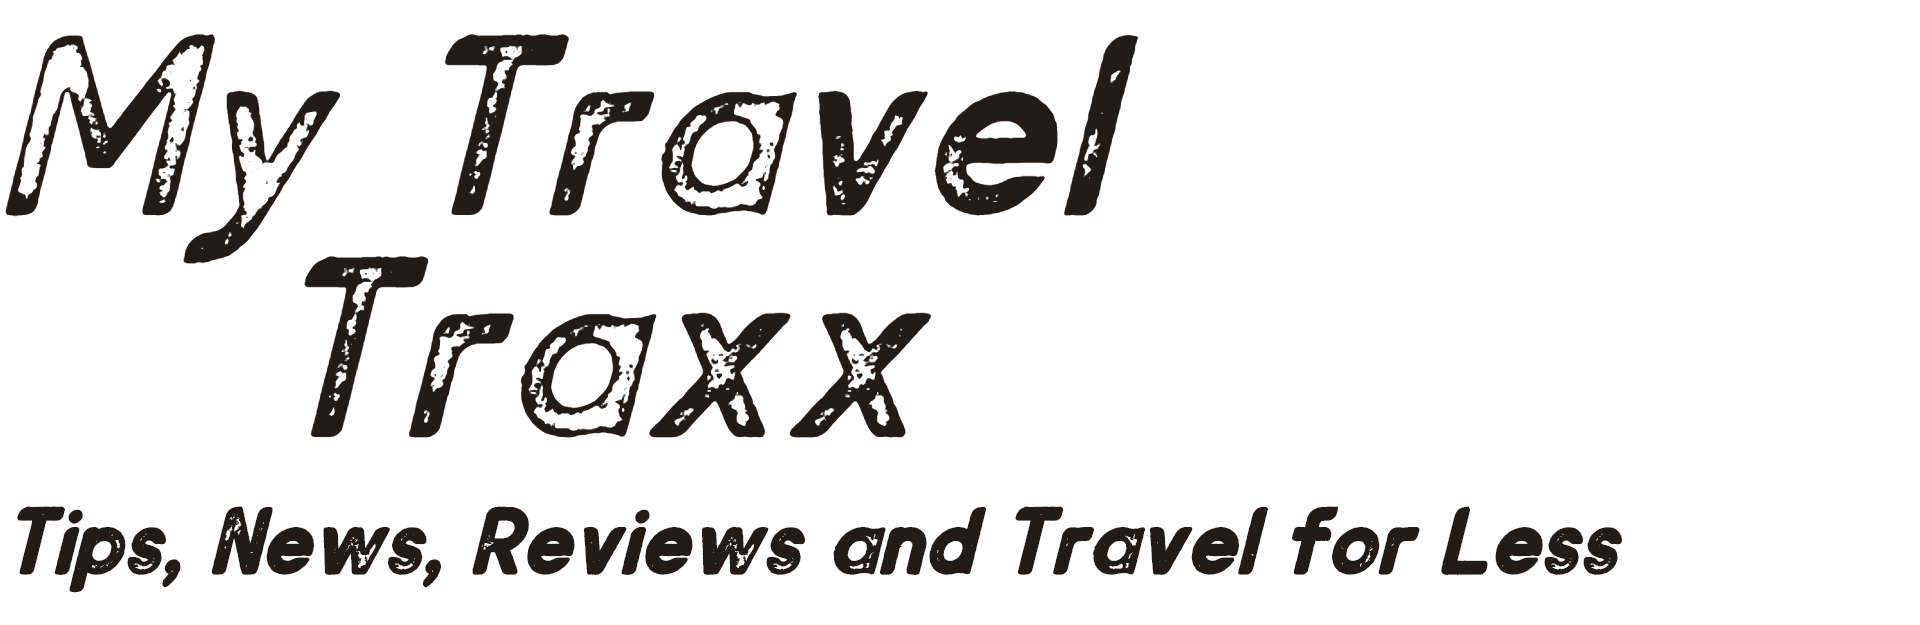 My Travel Traxx | Tips, News, Reviews & Travel for Less